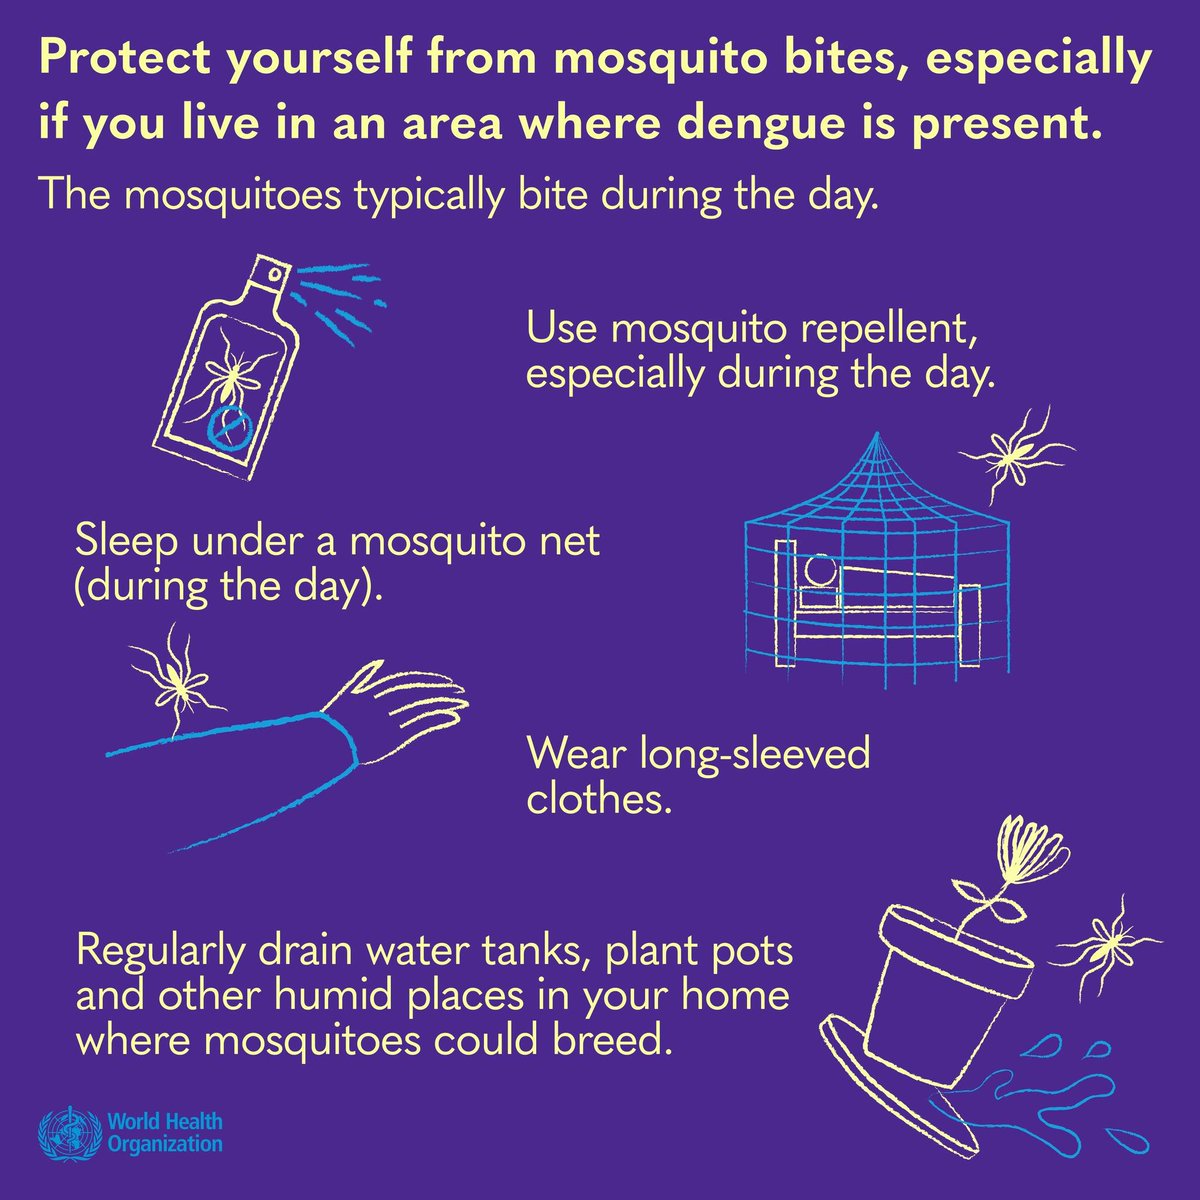 Infected #dengue mosquitoes are active during the day ☀️ You can lower the risk by using: ✅ mosquito repellents ✅ long-sleeved clothes ✅ mosquito nets when sleeping during the day ✅ window screens Remember to often drain, wash & scrub water storage containers.…